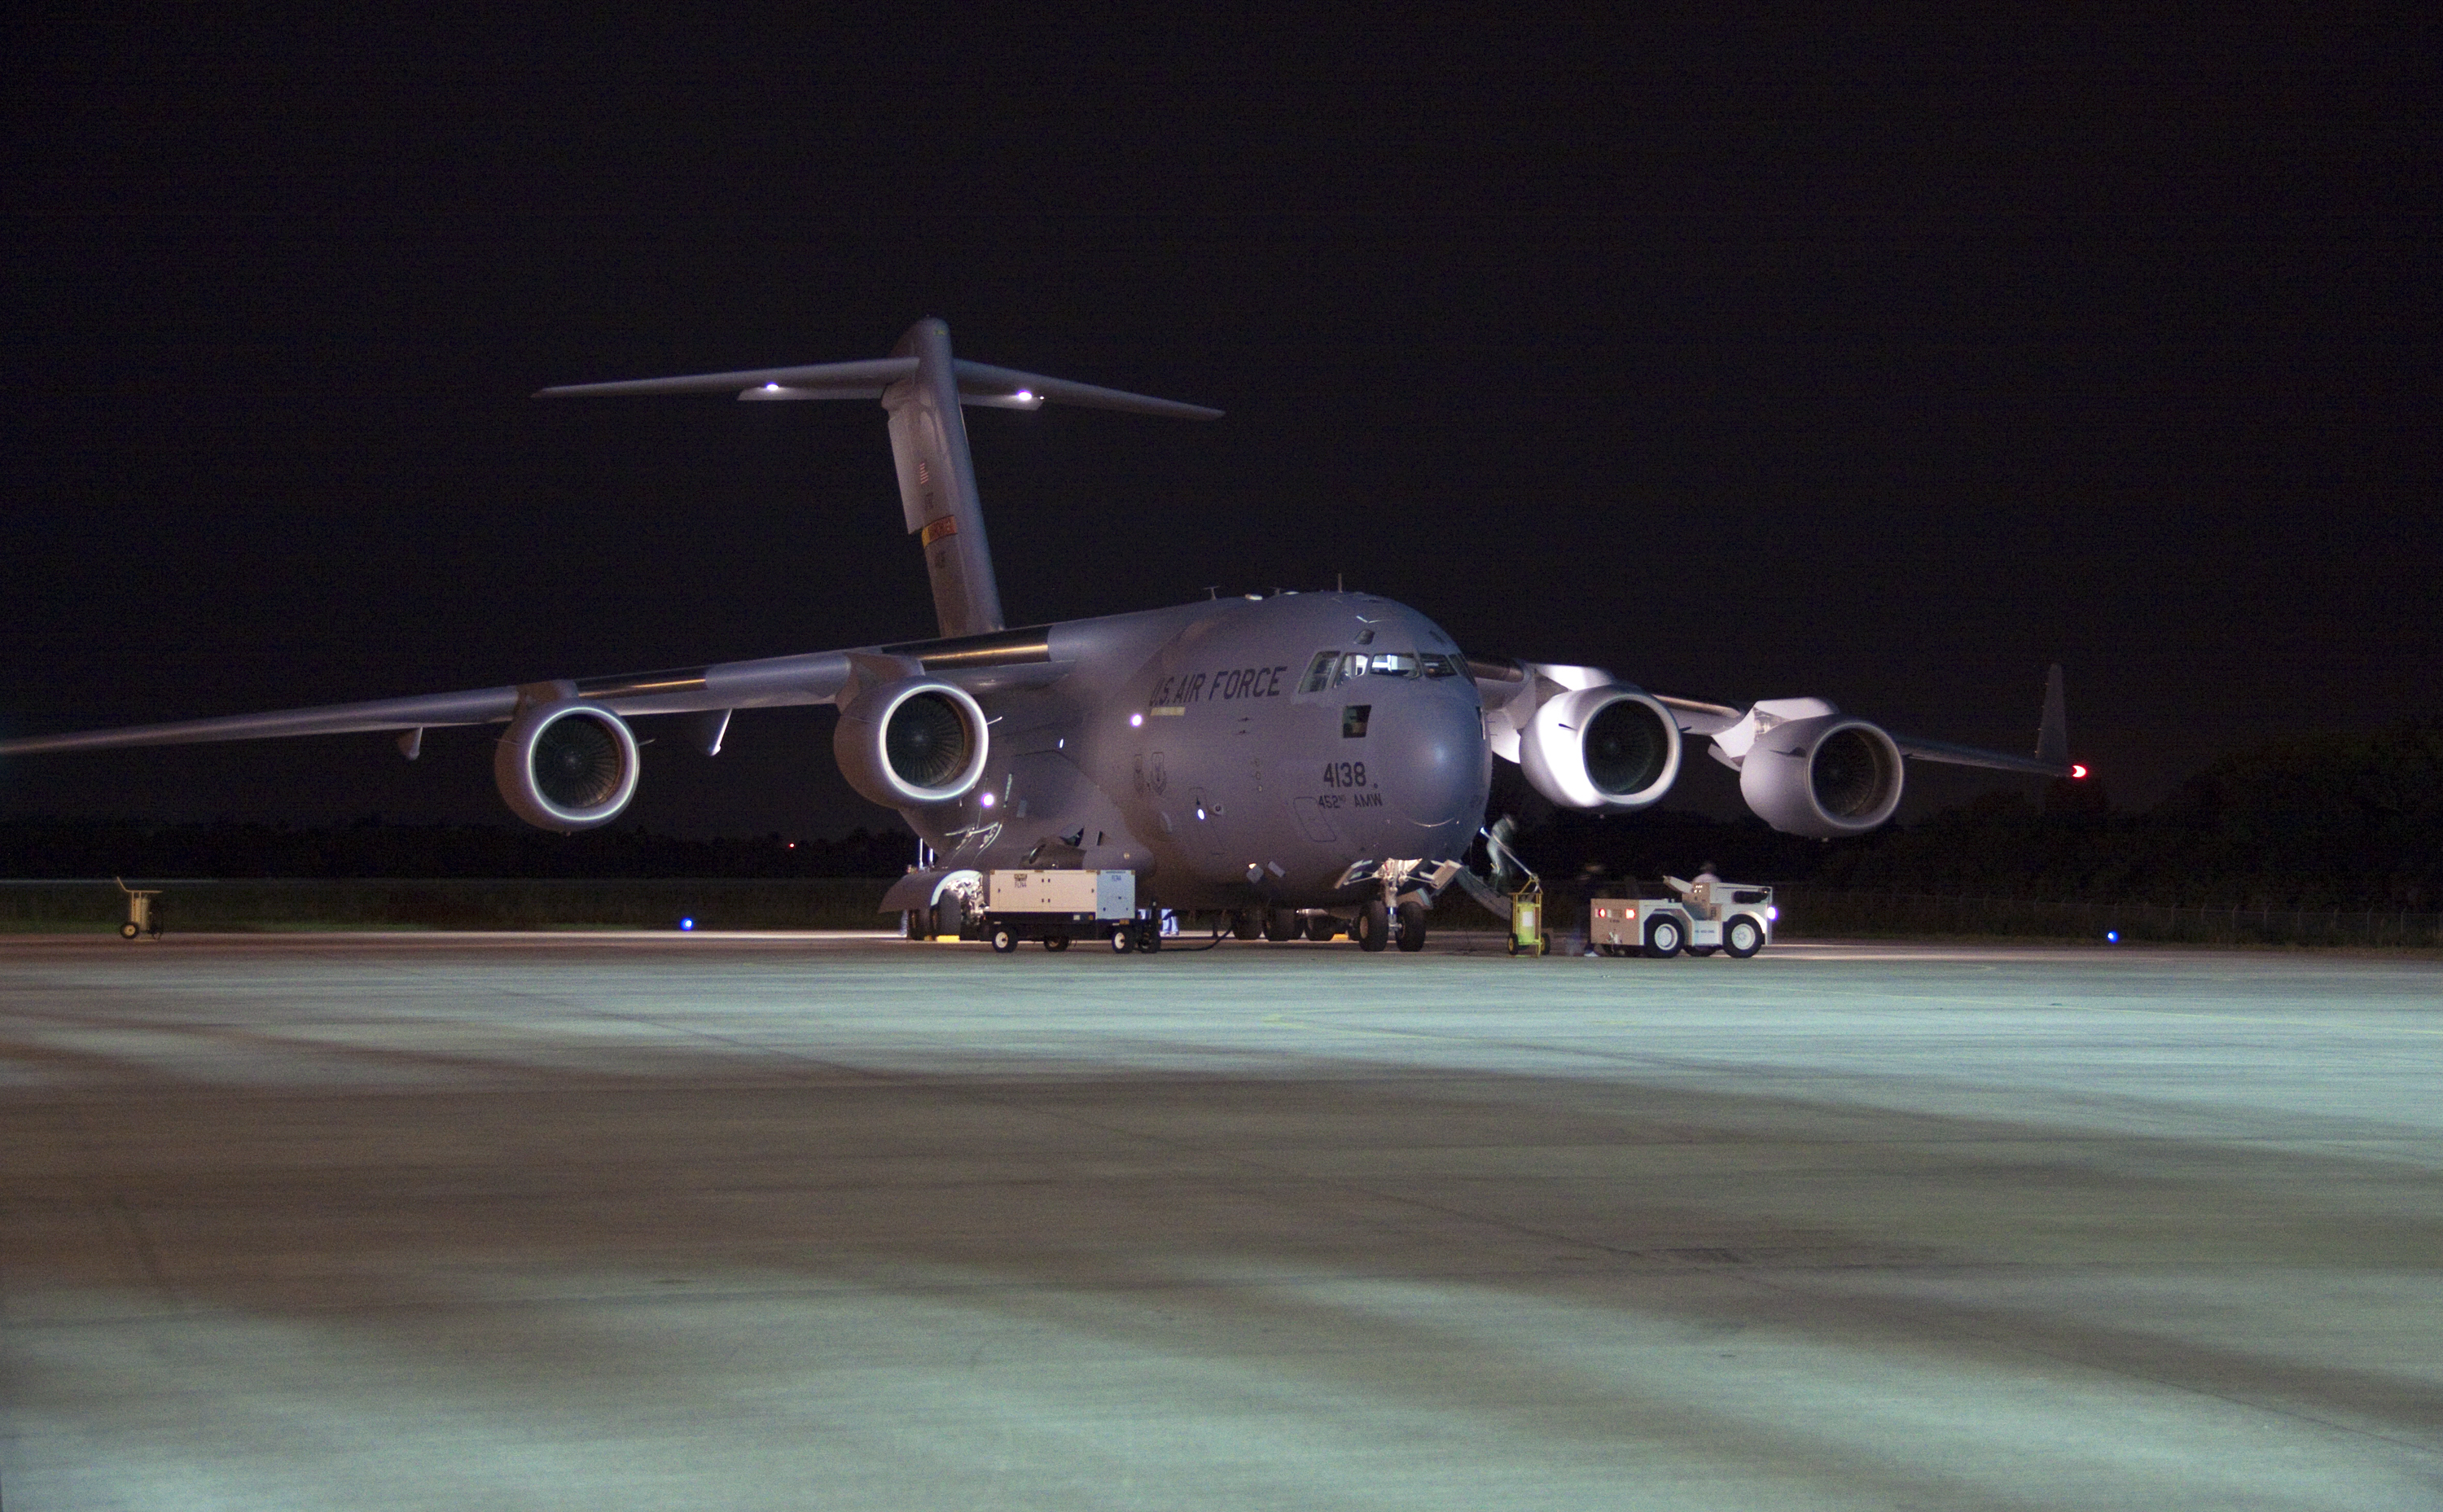 The first three elements for NASA's Mars Science Laboratory (MSL) arrive at NASA Kennedy Space Center's Shuttle Landing Facility aboard an Air Force C-17 cargo plane.